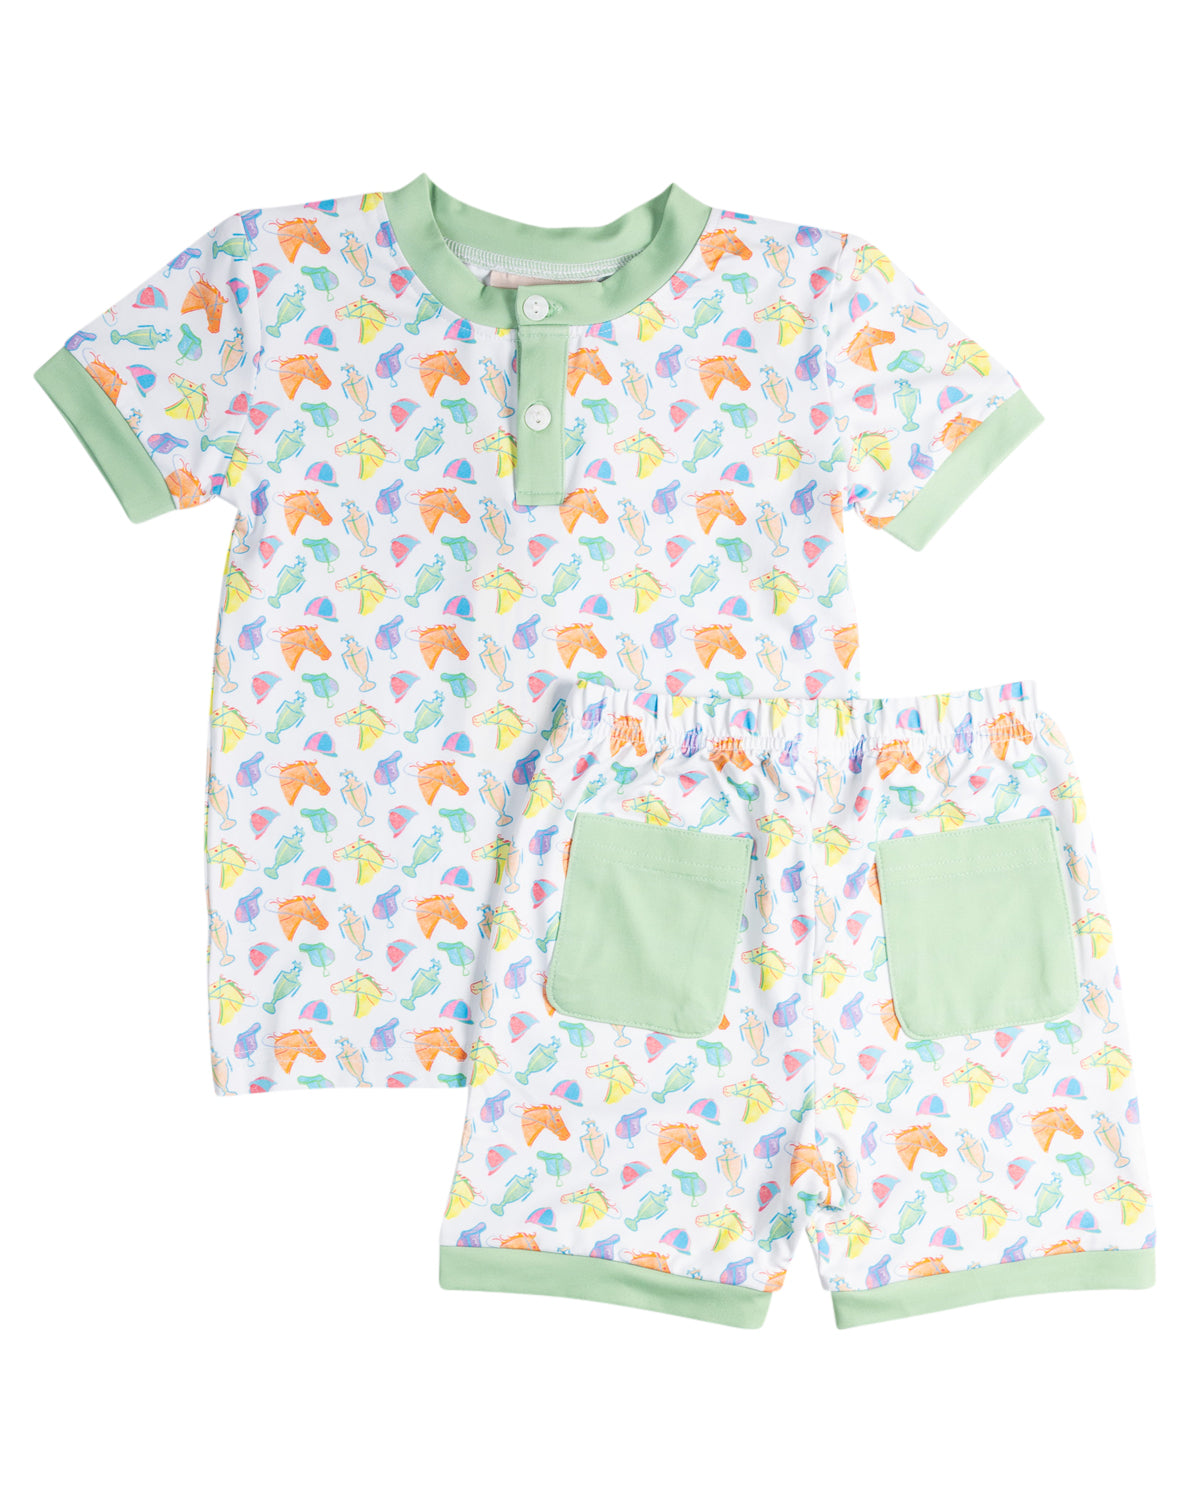 Run for the Roses Short Sleeve Pajama Set with Green Trim